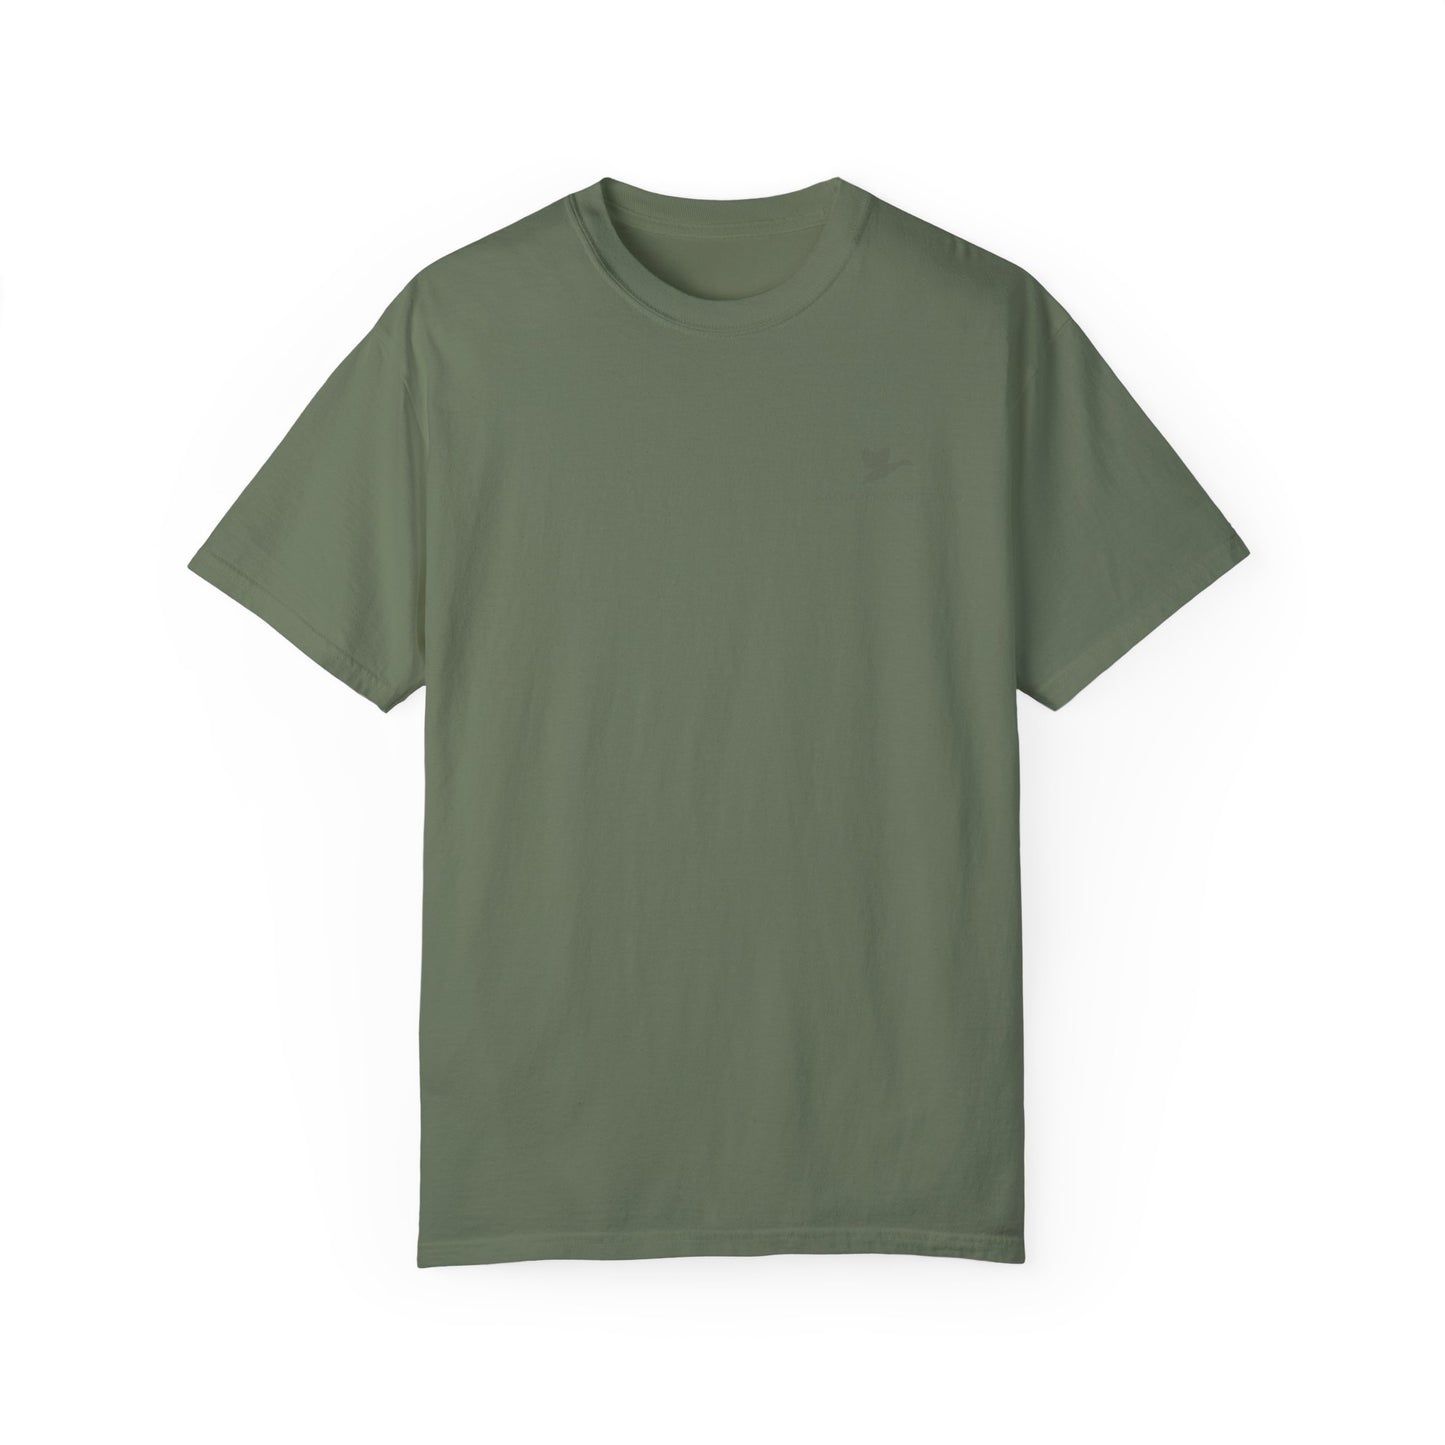 Tennessee Buck Comfort Colors T-shirt